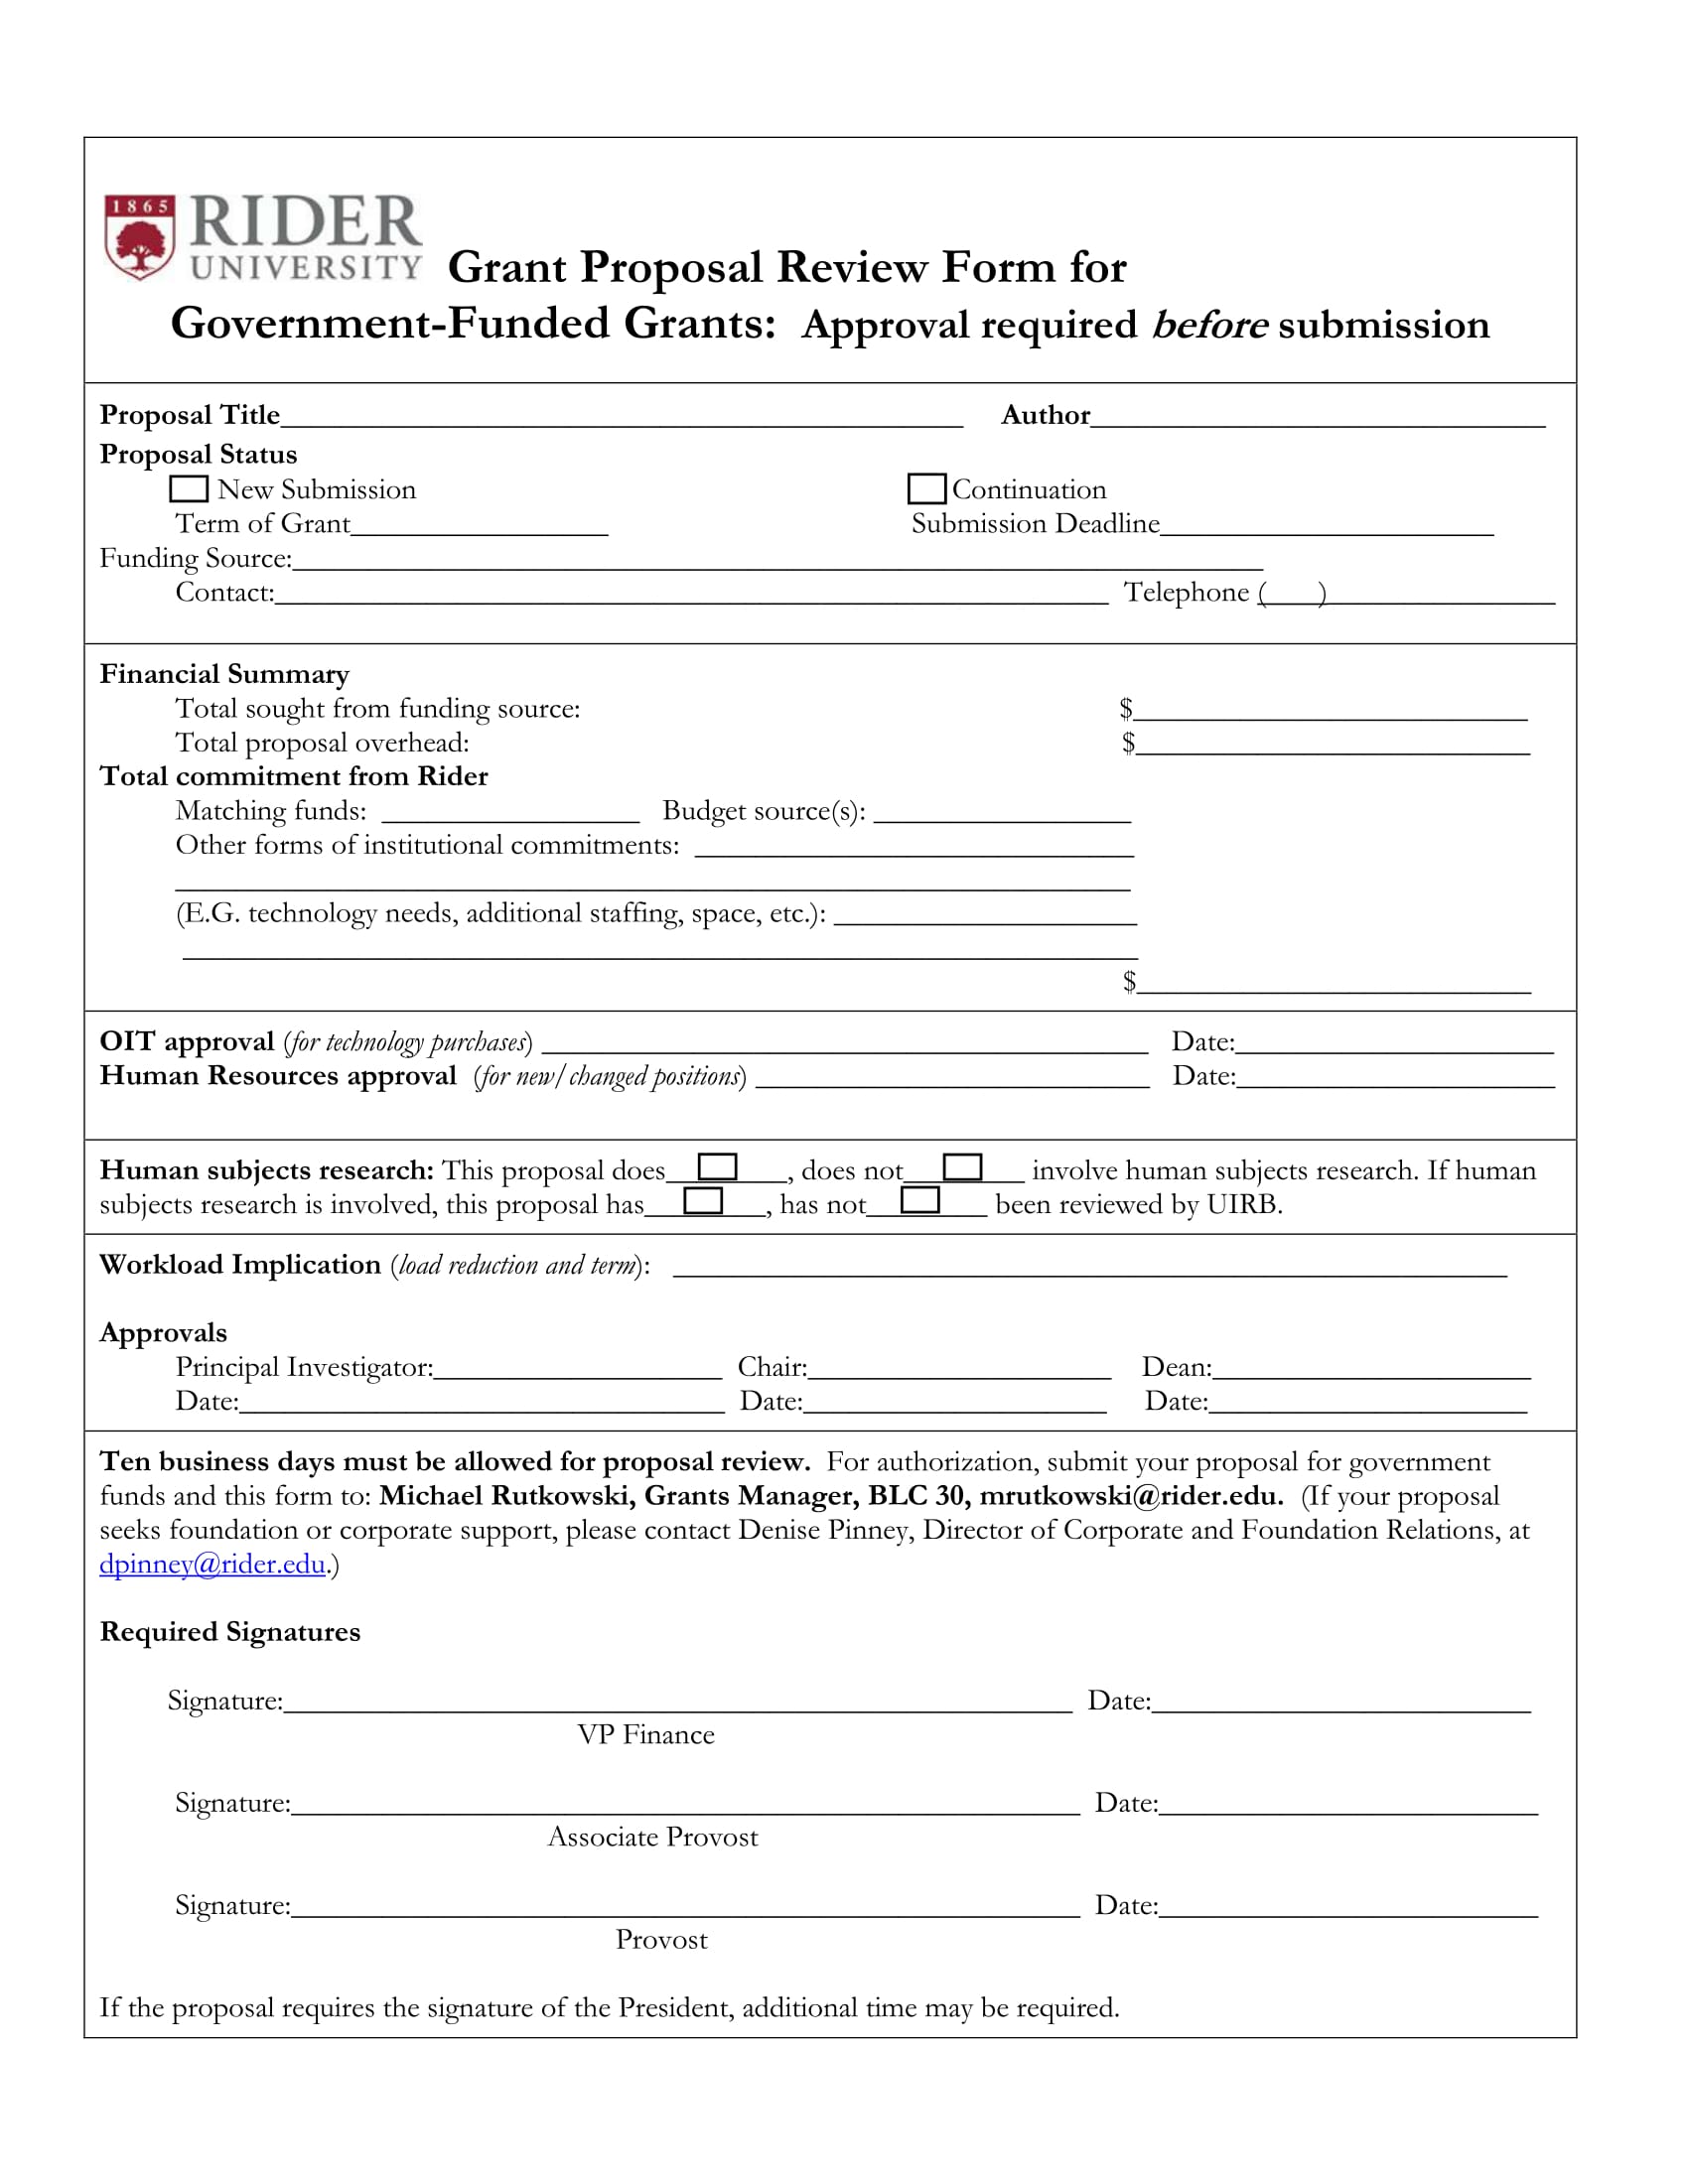 grant proposal review form 1